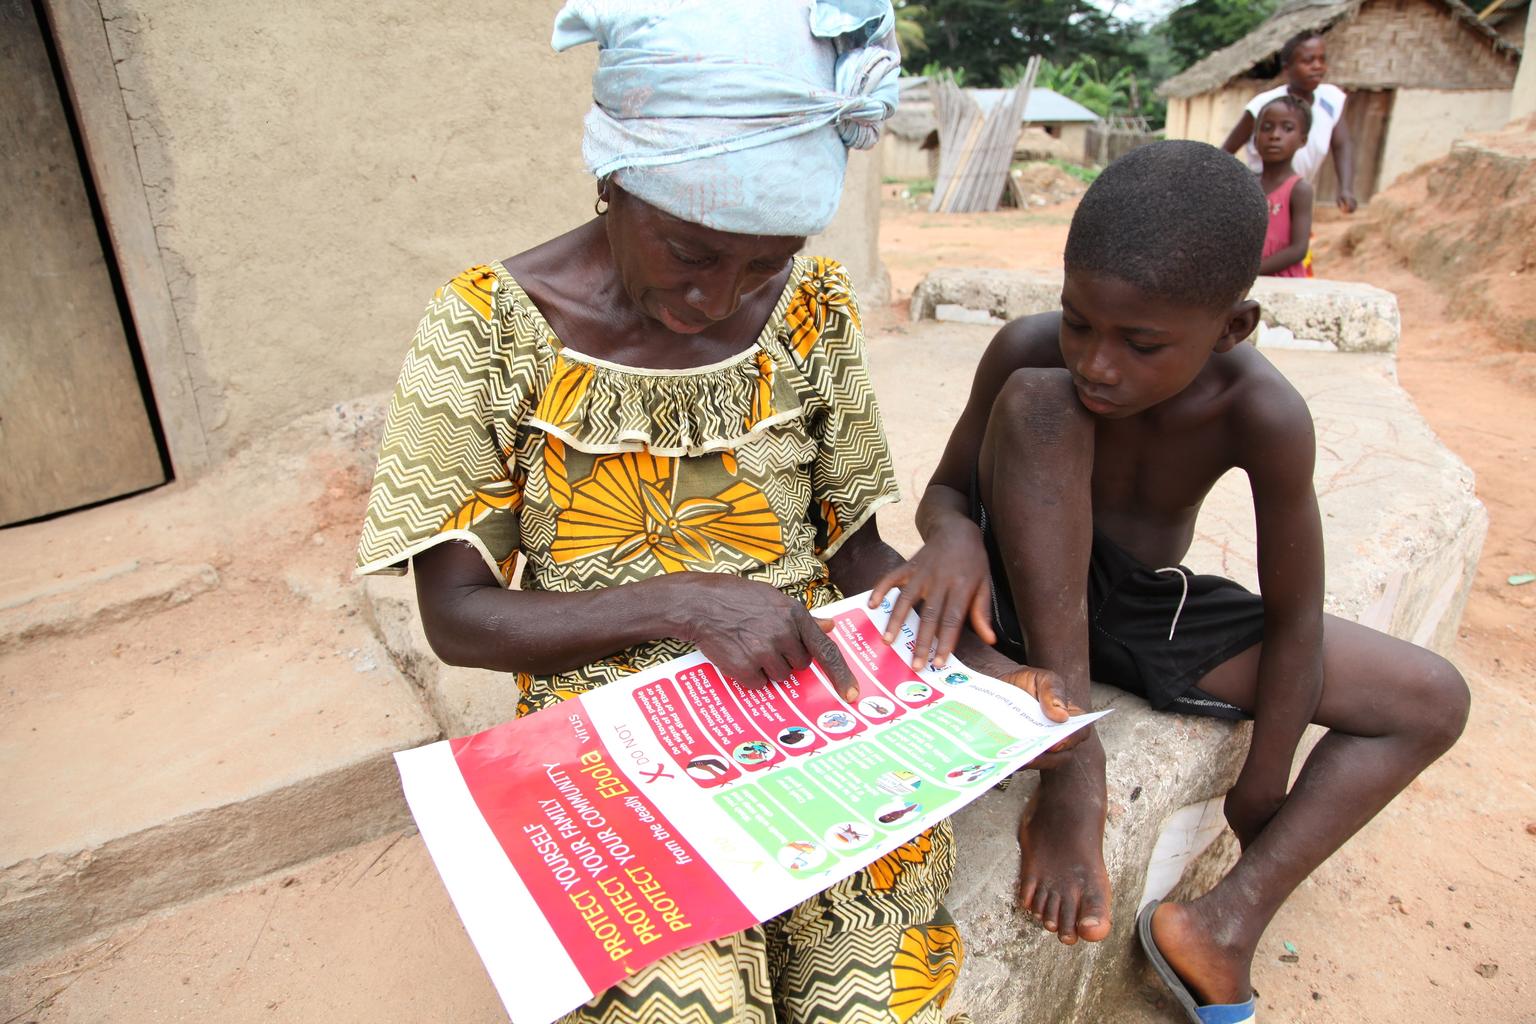 A woman speaks with a young boy in her community about the symptoms of Ebola virus disease (EVD) and best practices to help prevent its spread, in the city of Voinjama, in Lofa County. While speaking, she is referencing a poster, distributed by UNICEF, th